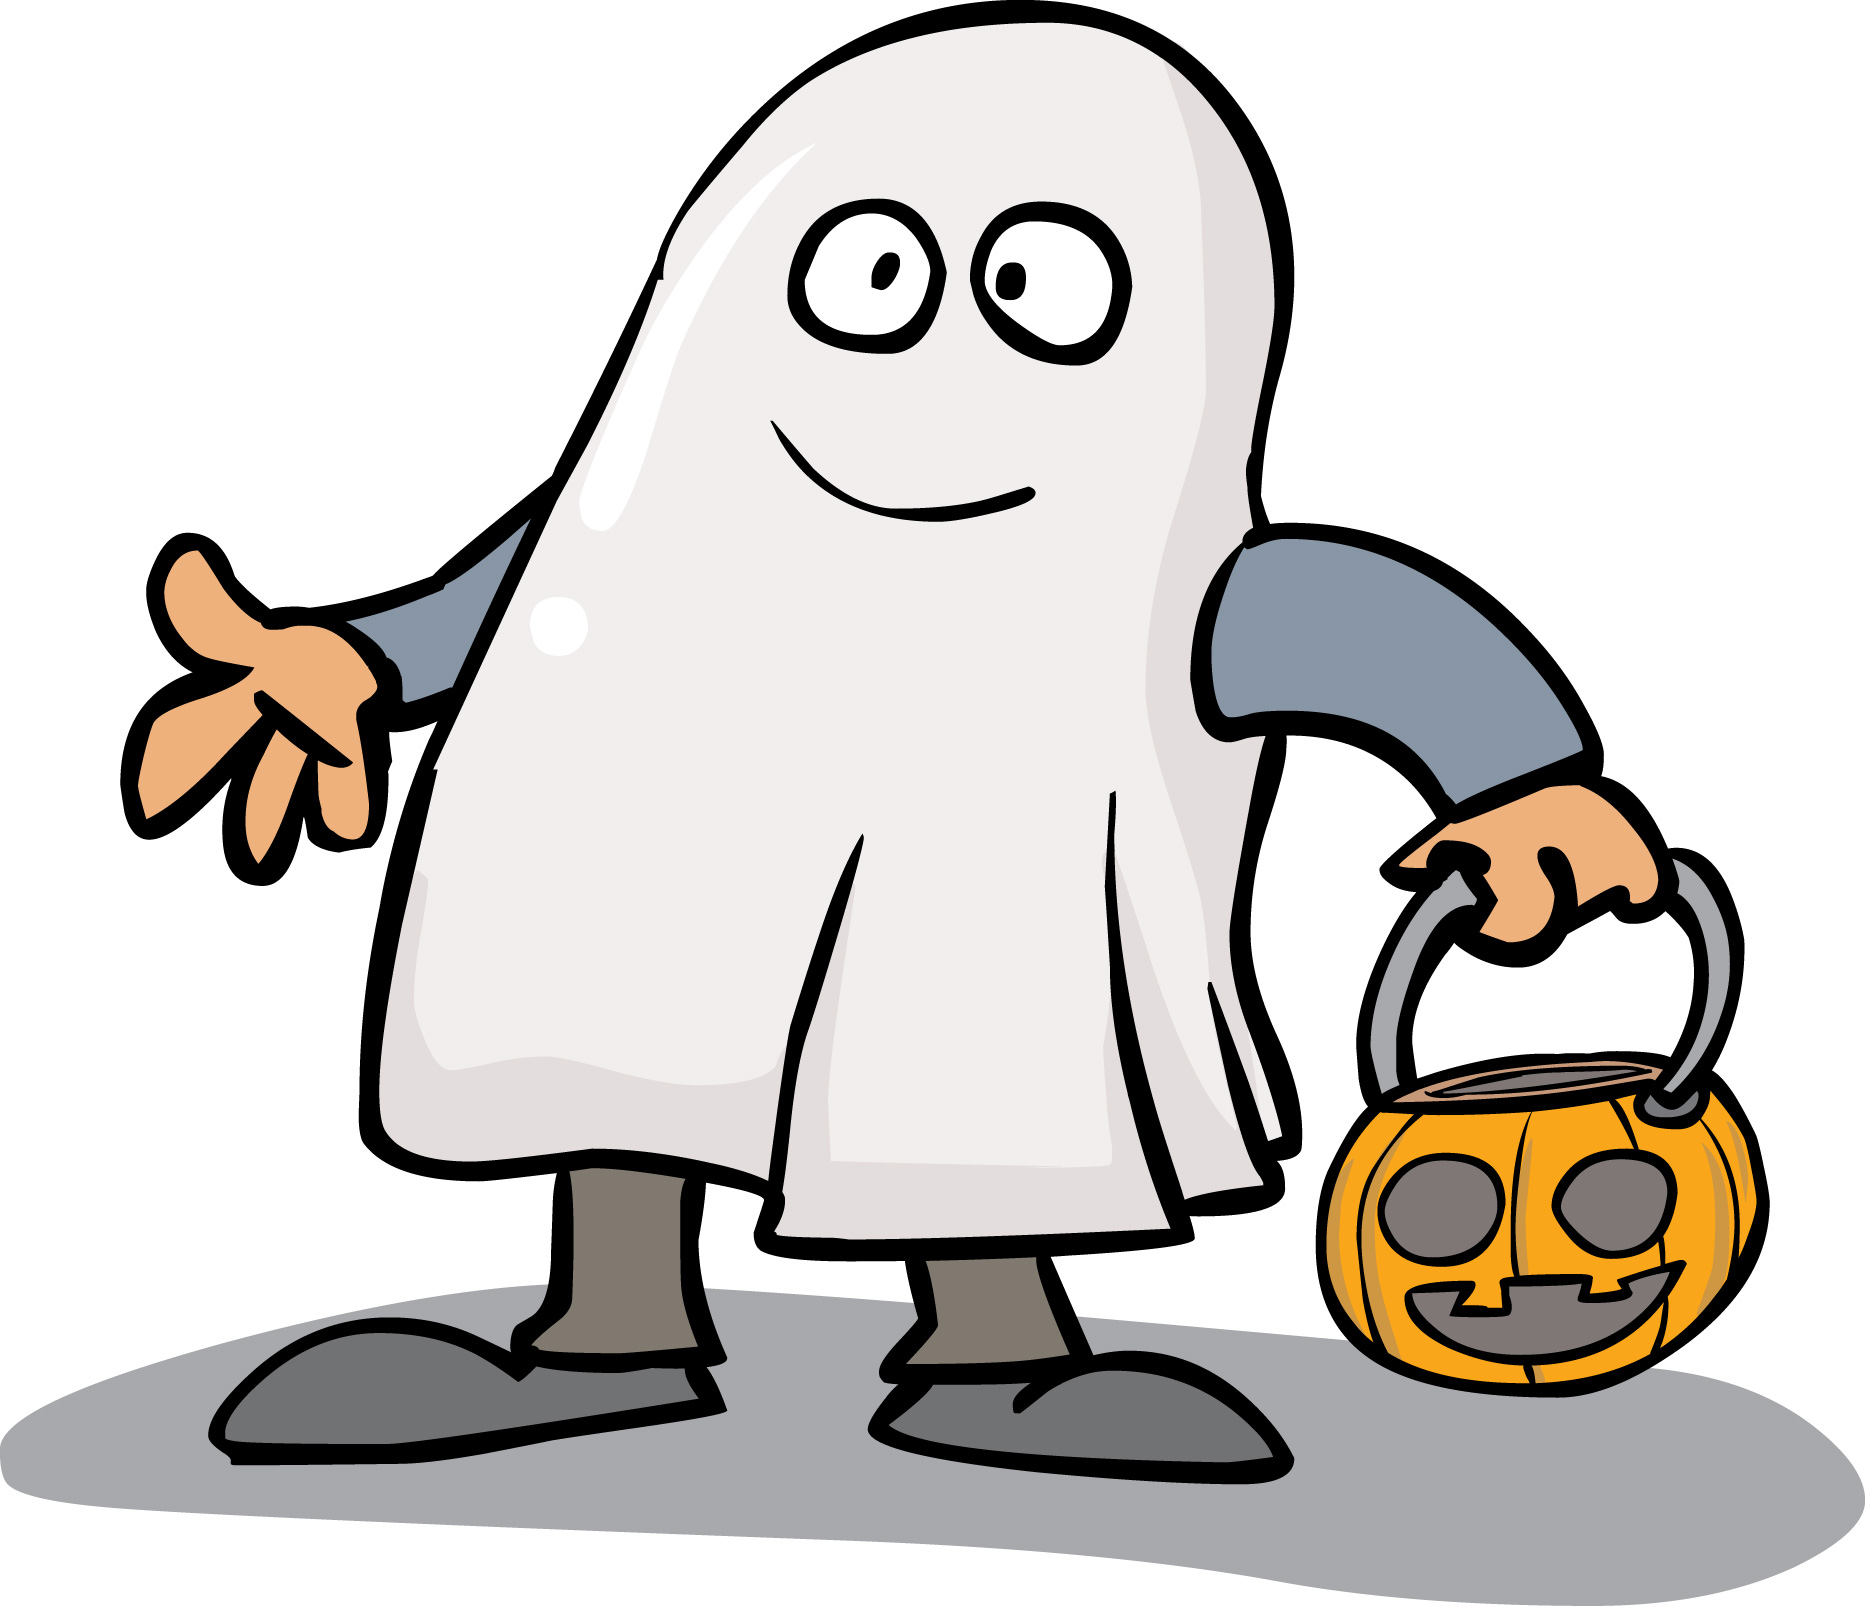 Free halloween costumes download. Ghost clipart costume